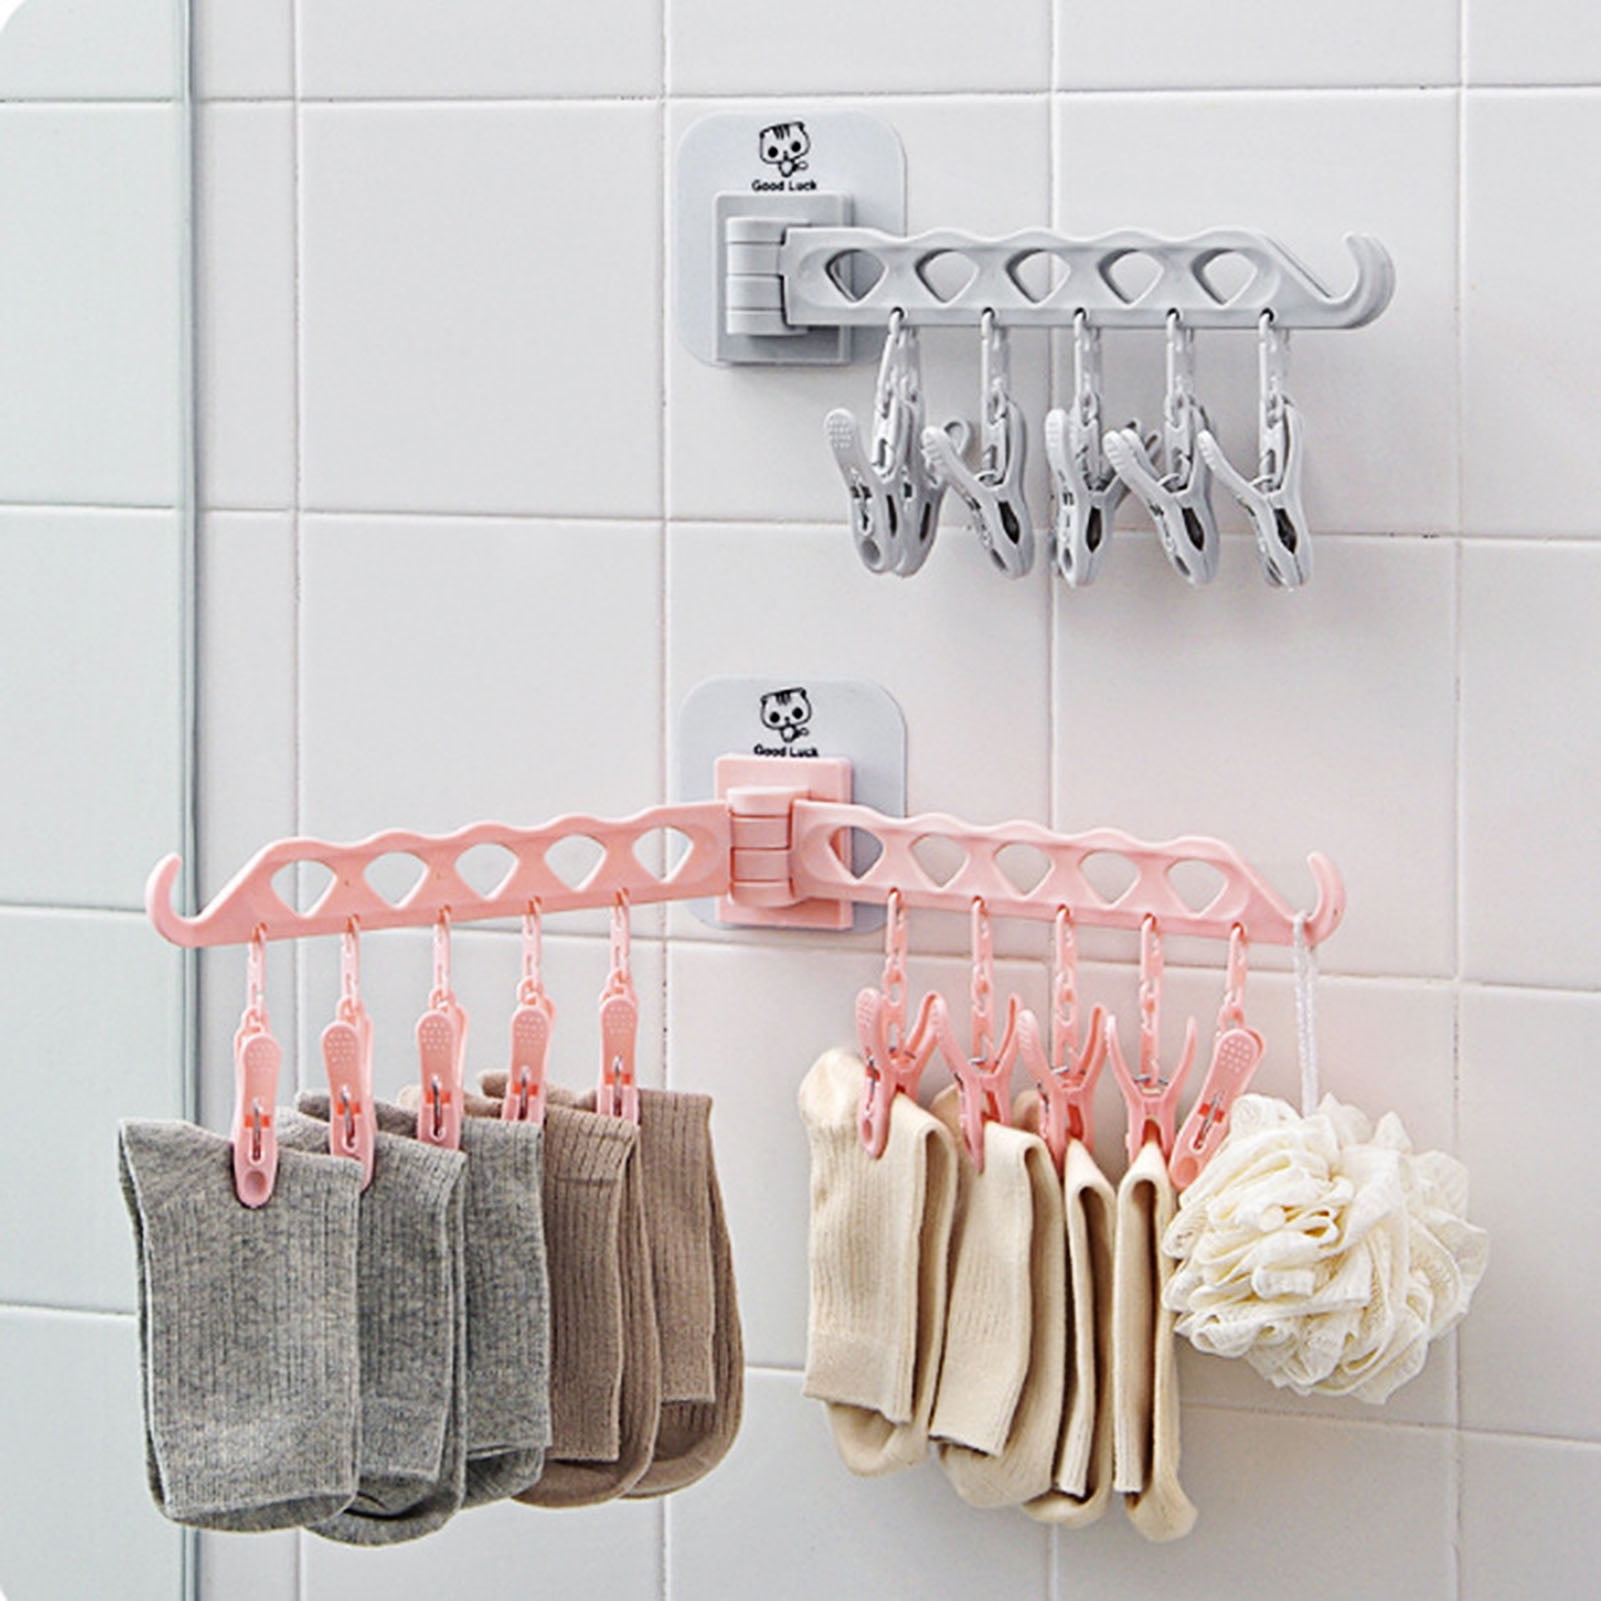 Yesbay Multi-functional Self-adhesive Clothes Hanger 10 Clips